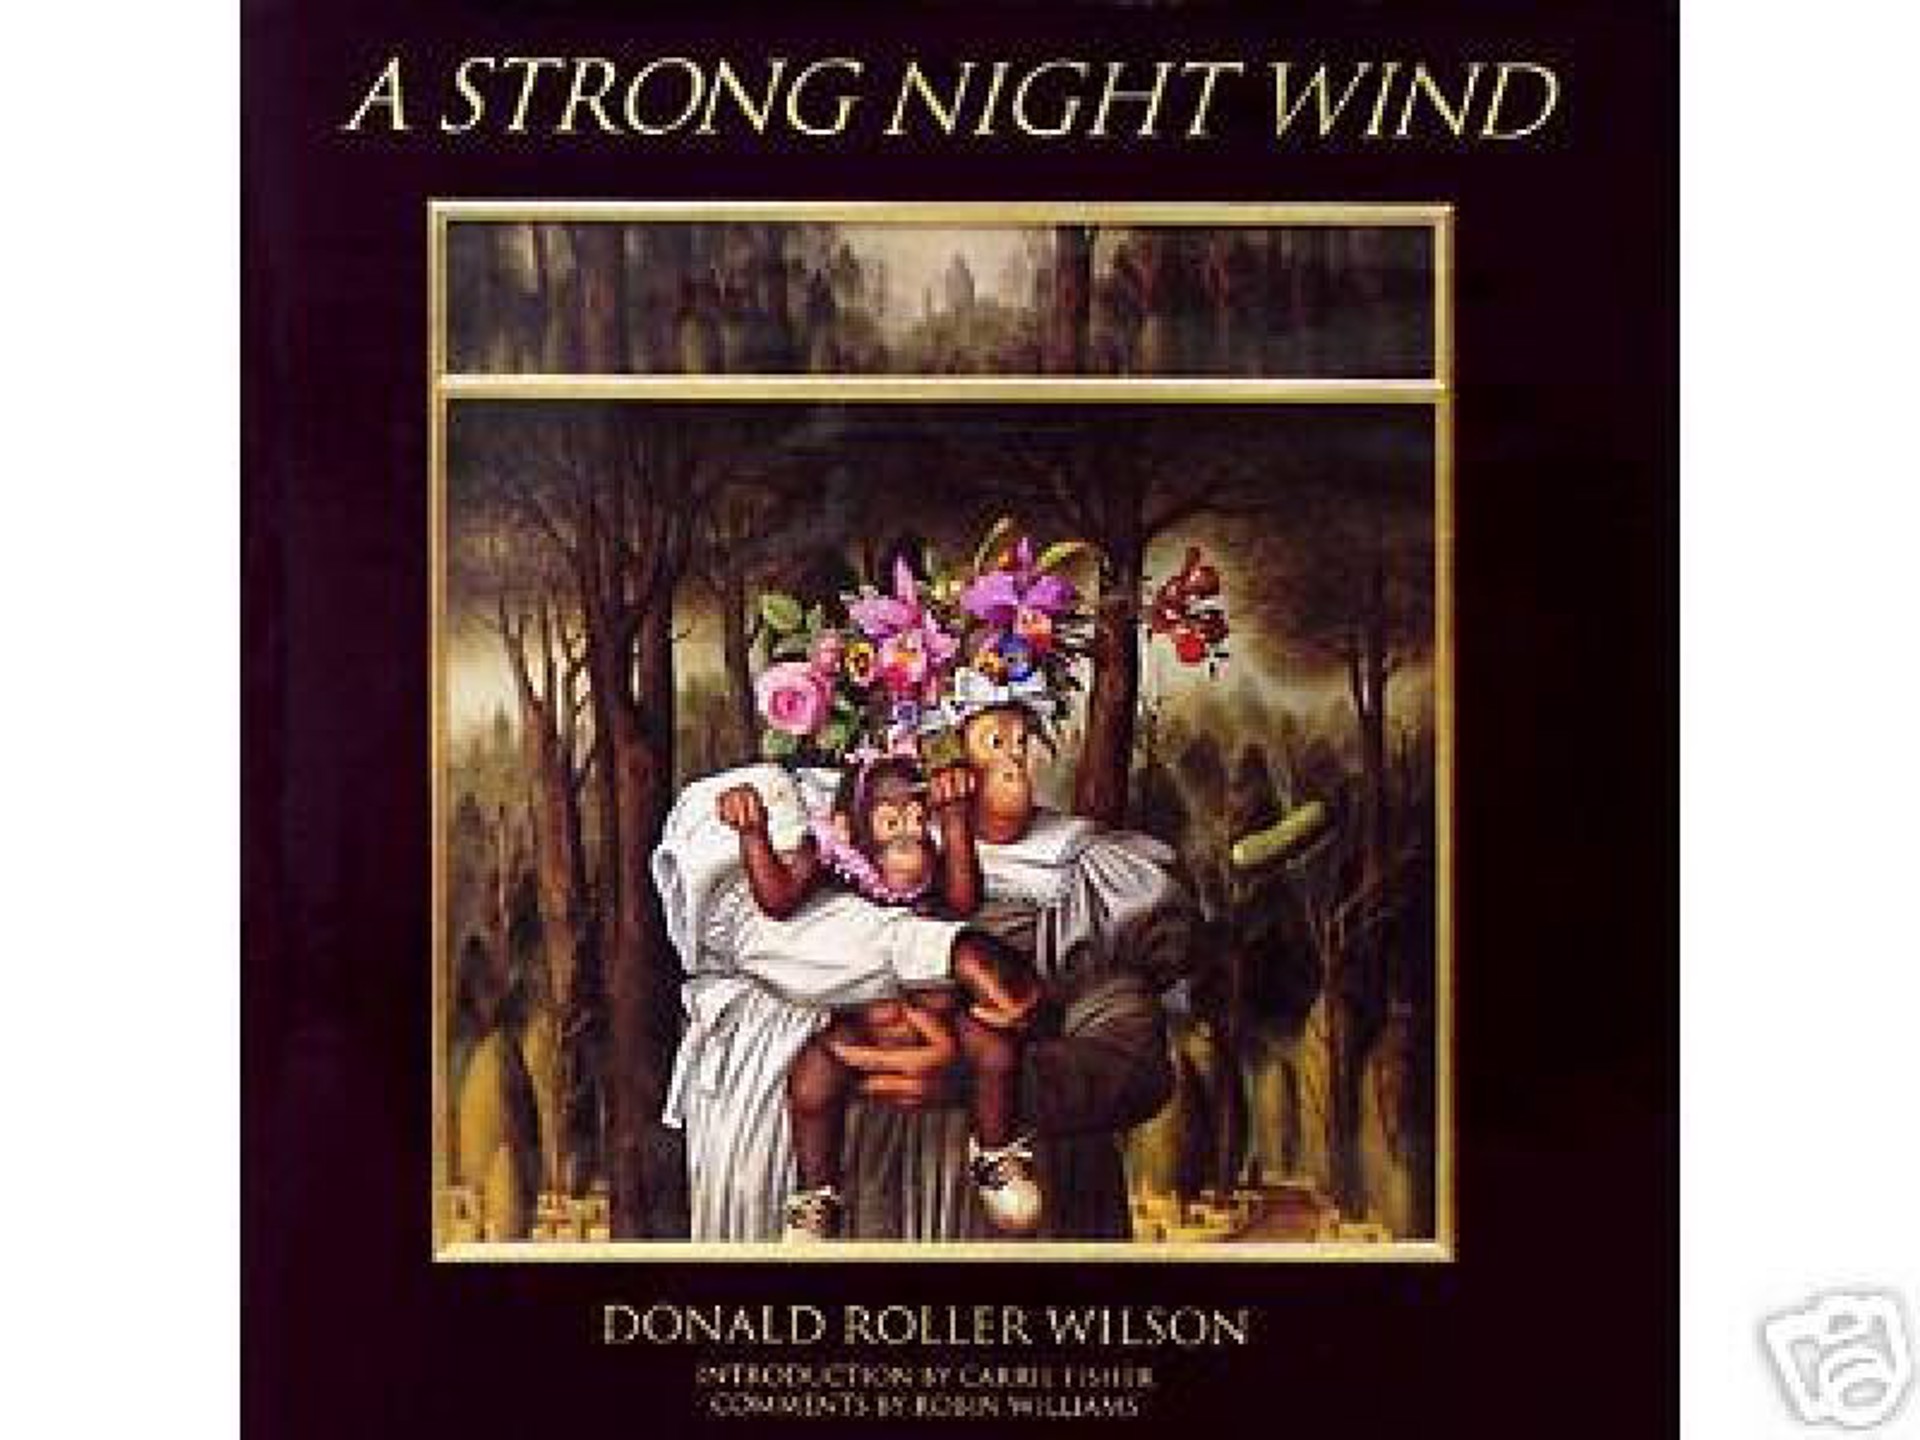 A Strong Night Wind by Donald Roller Wilson